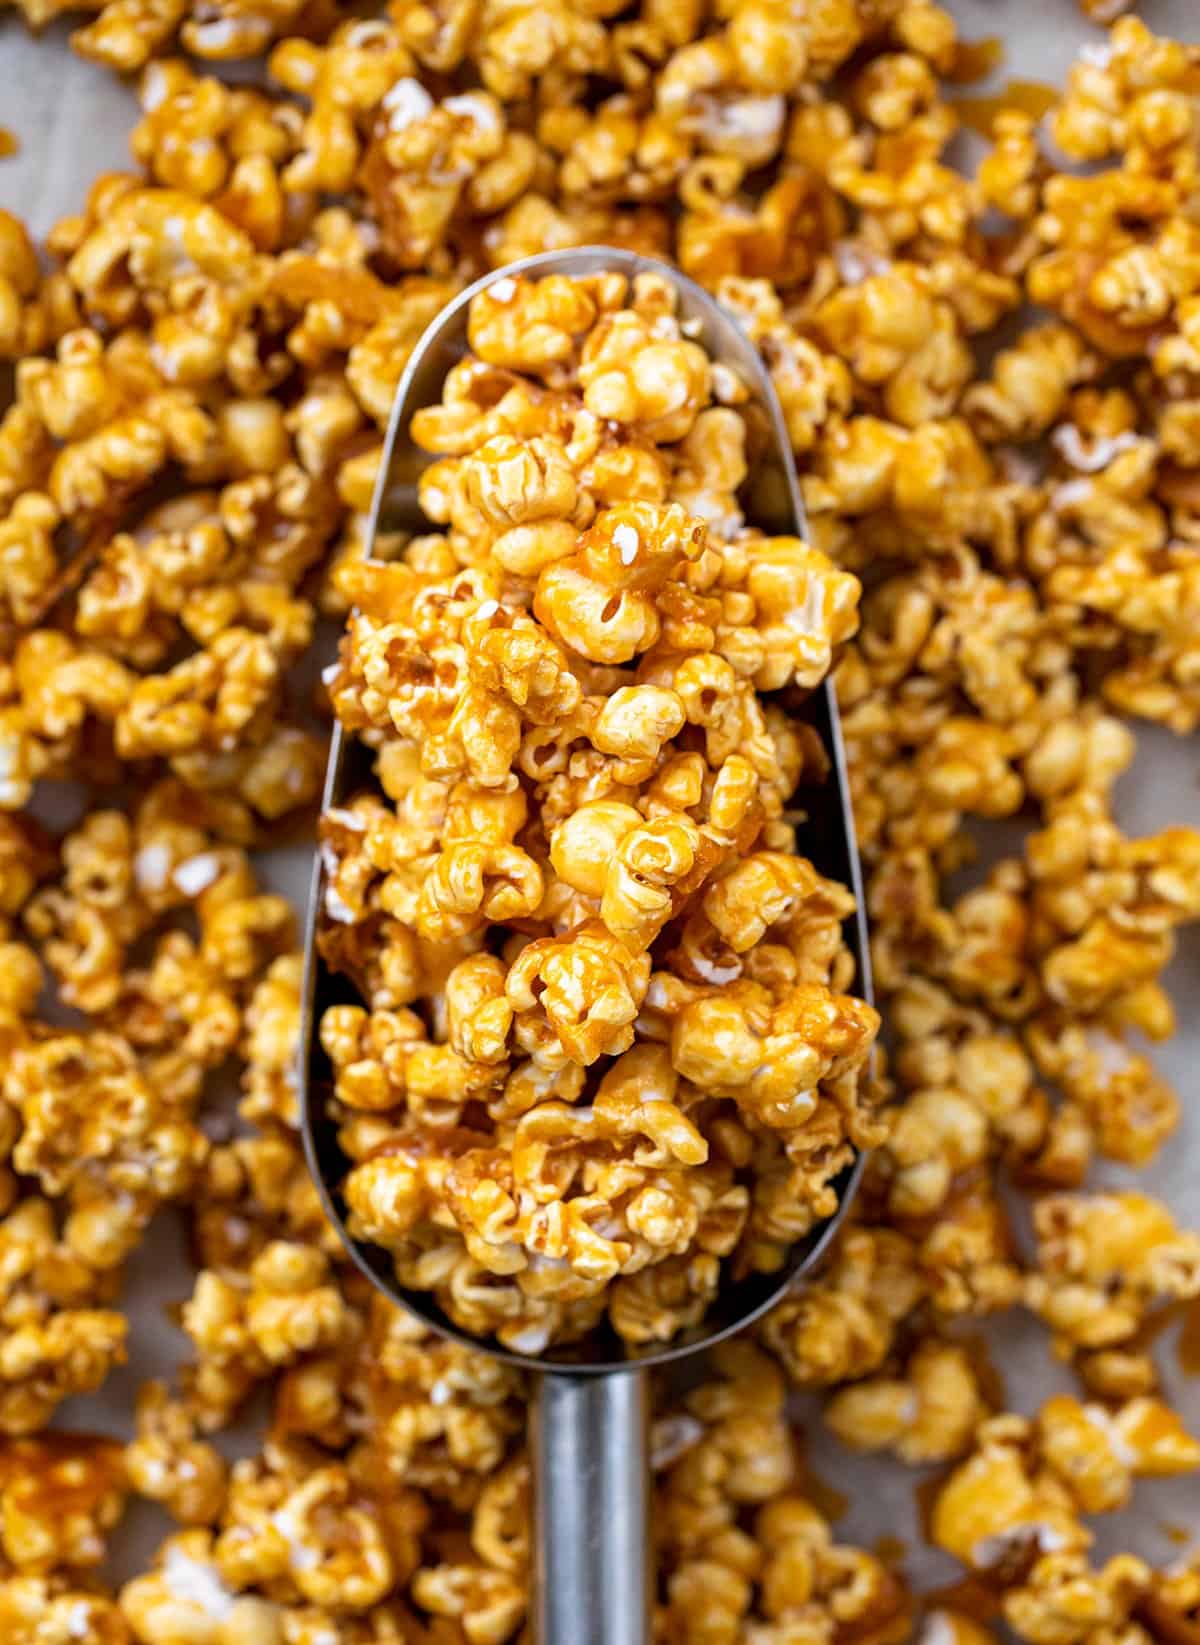 Scoop Filled with Caramel Corn